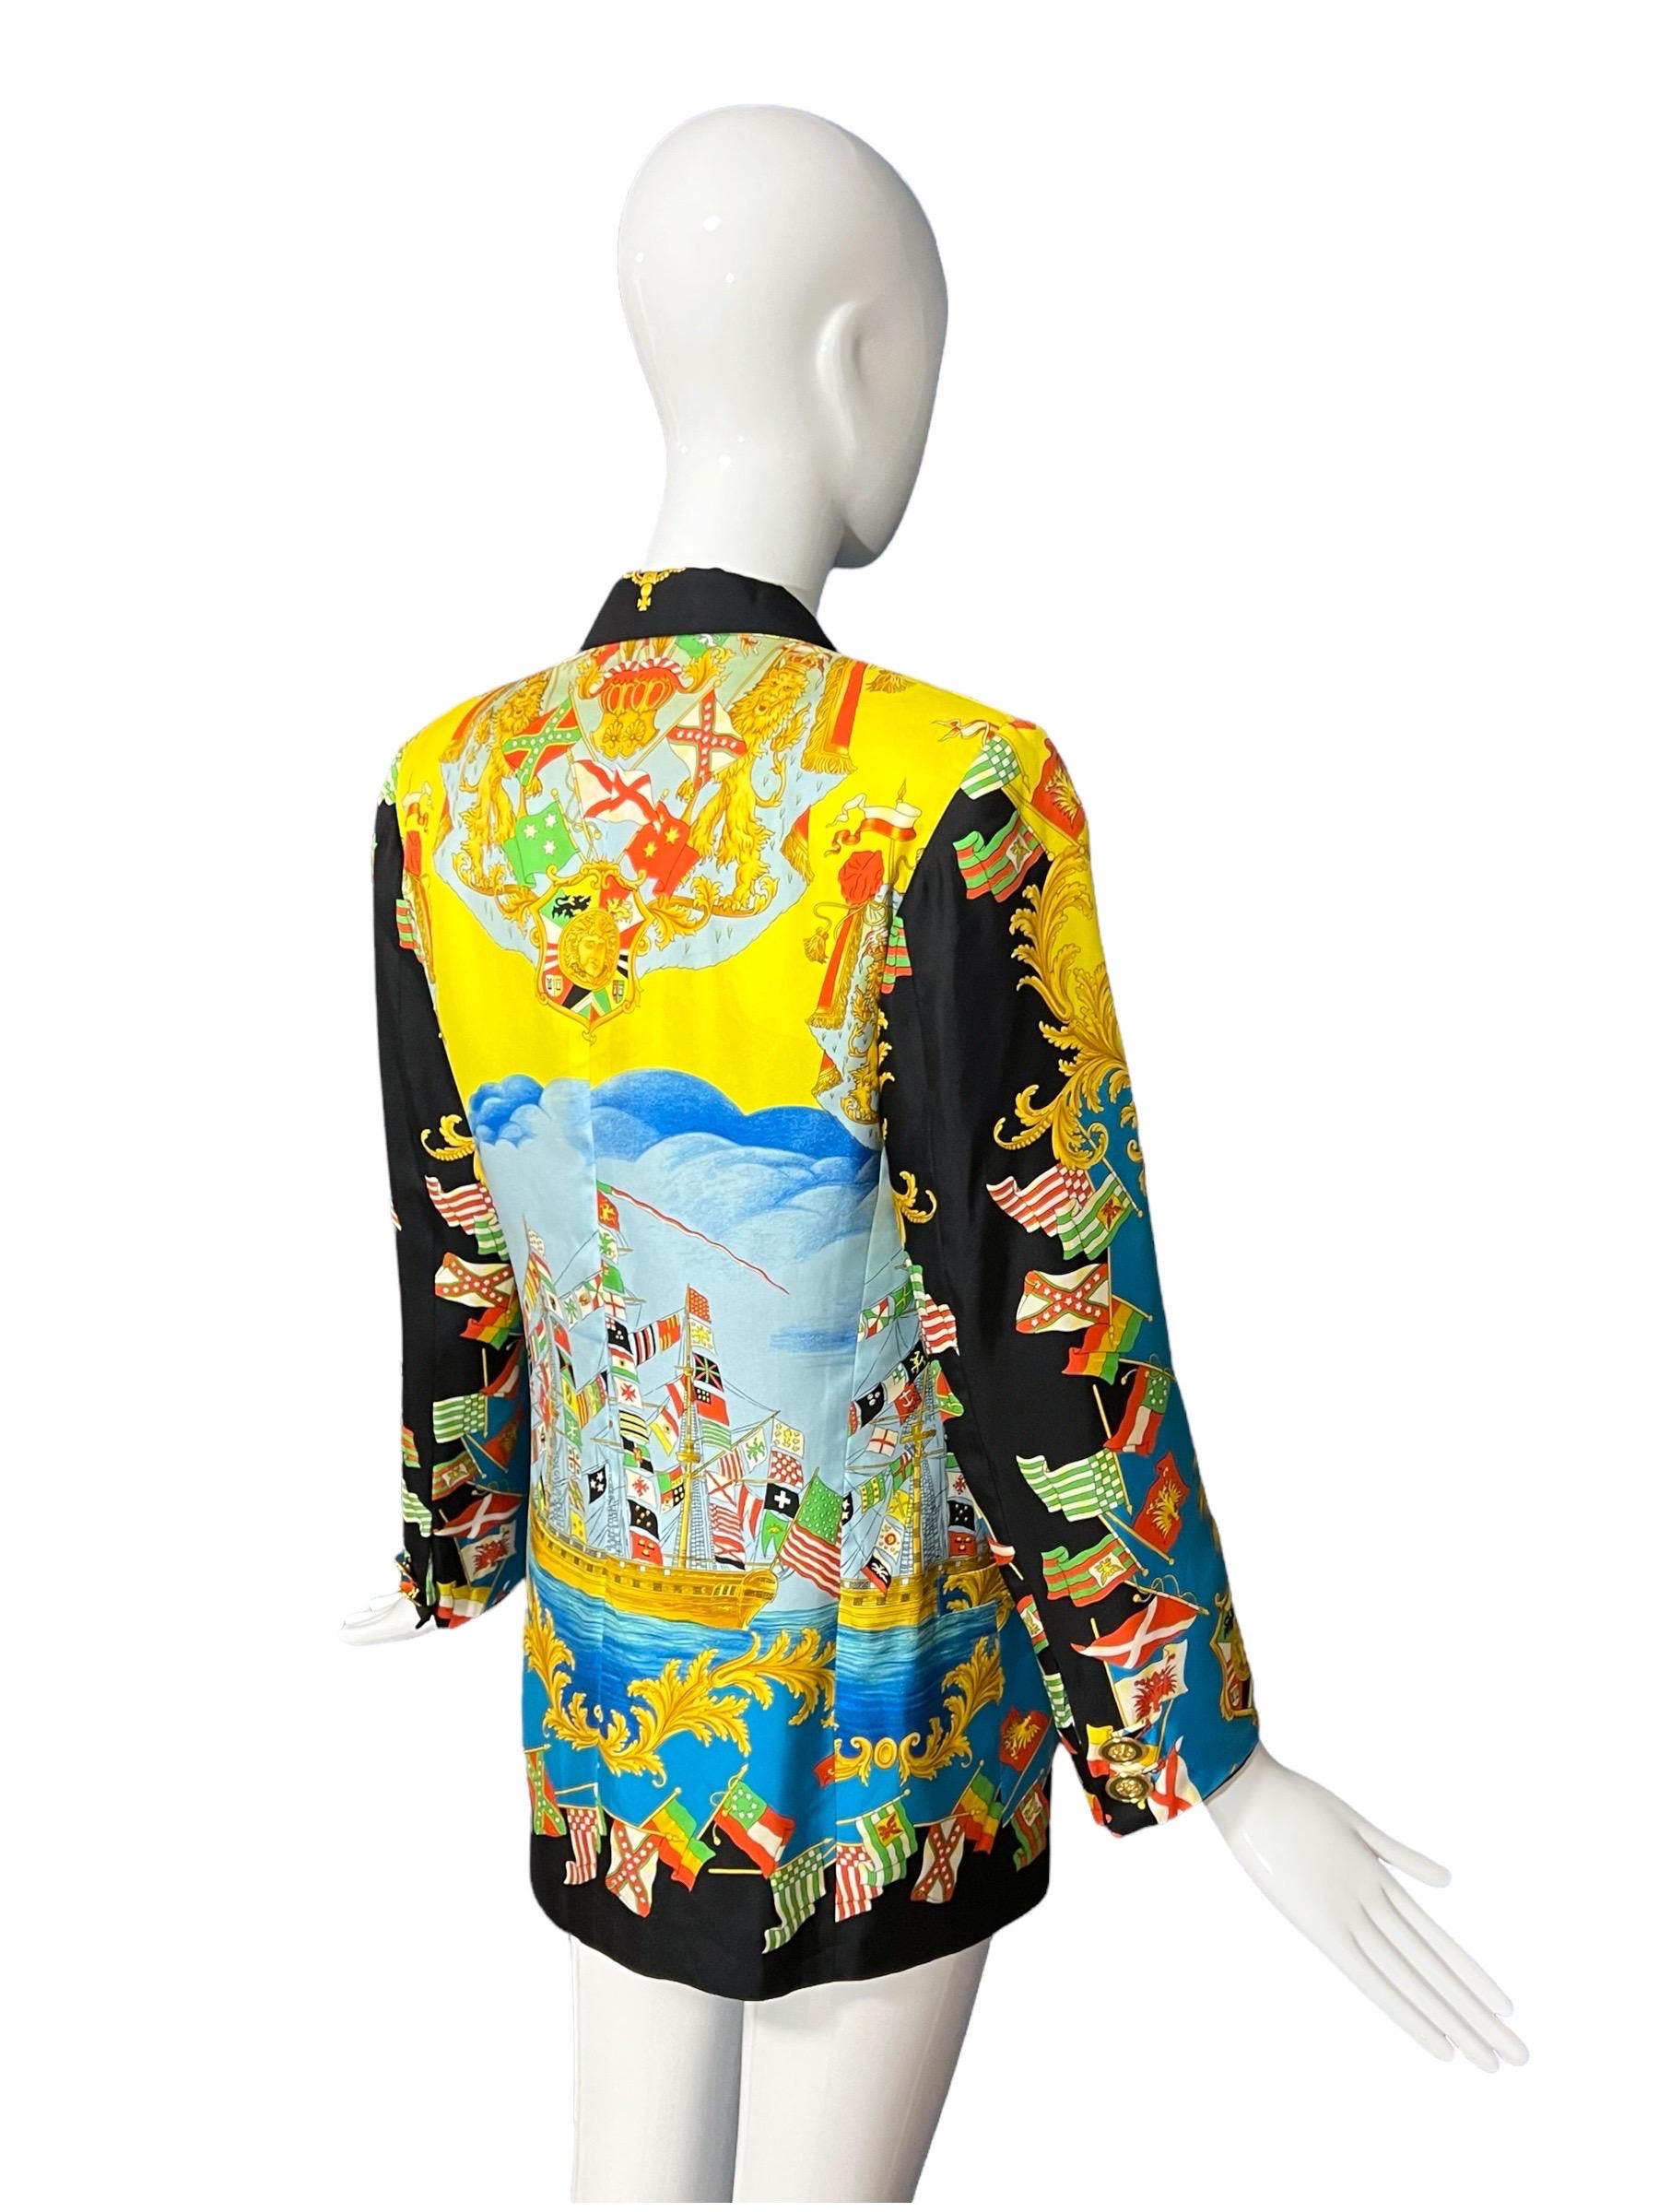 S/S 1993 Gianni Versace Baroque Flags Silk Blazer Jacket Miami Collection  For Sale 4